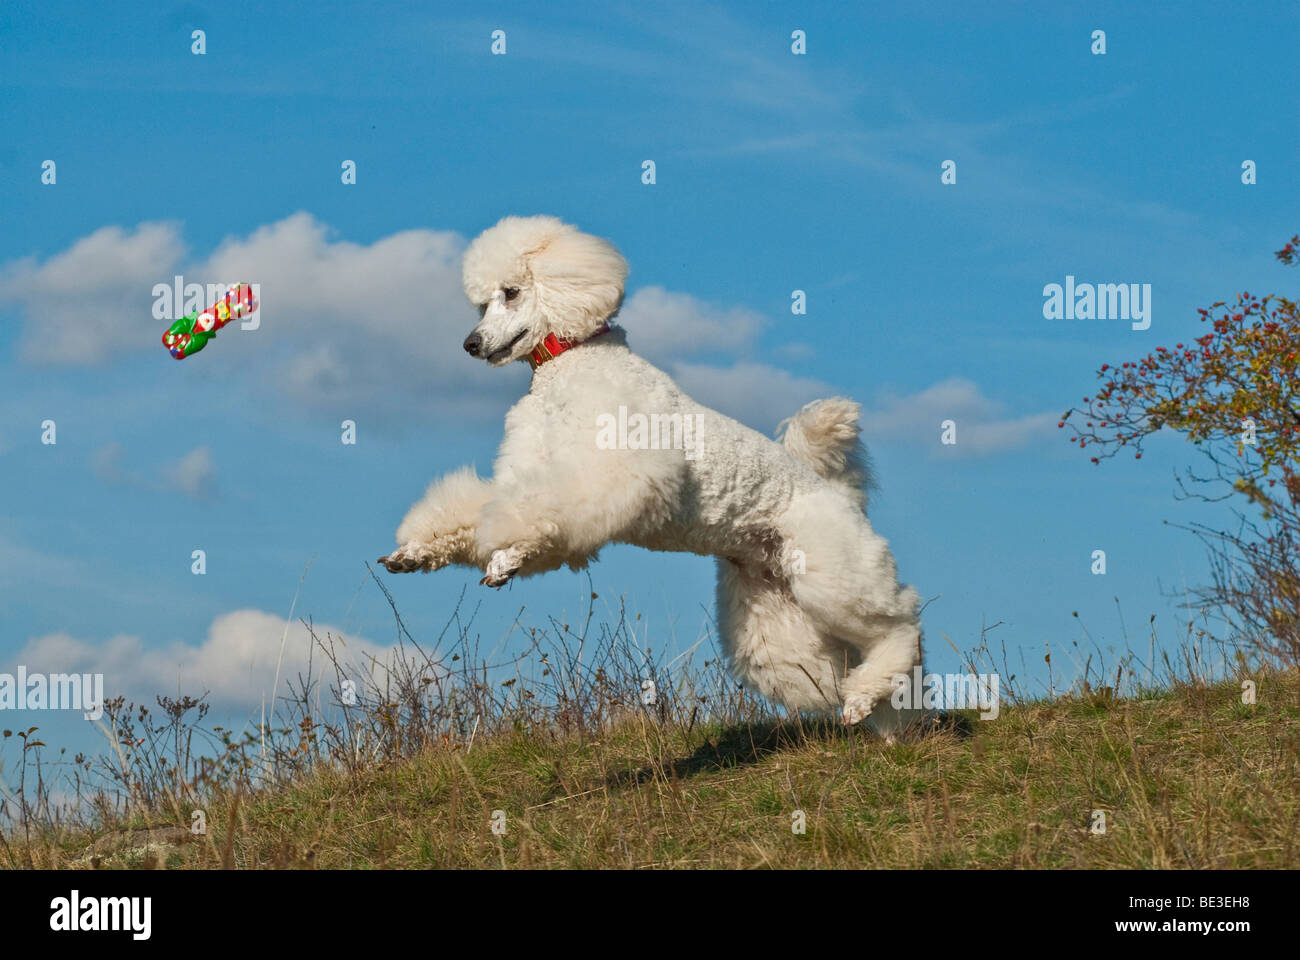 can poodles jump high? 2